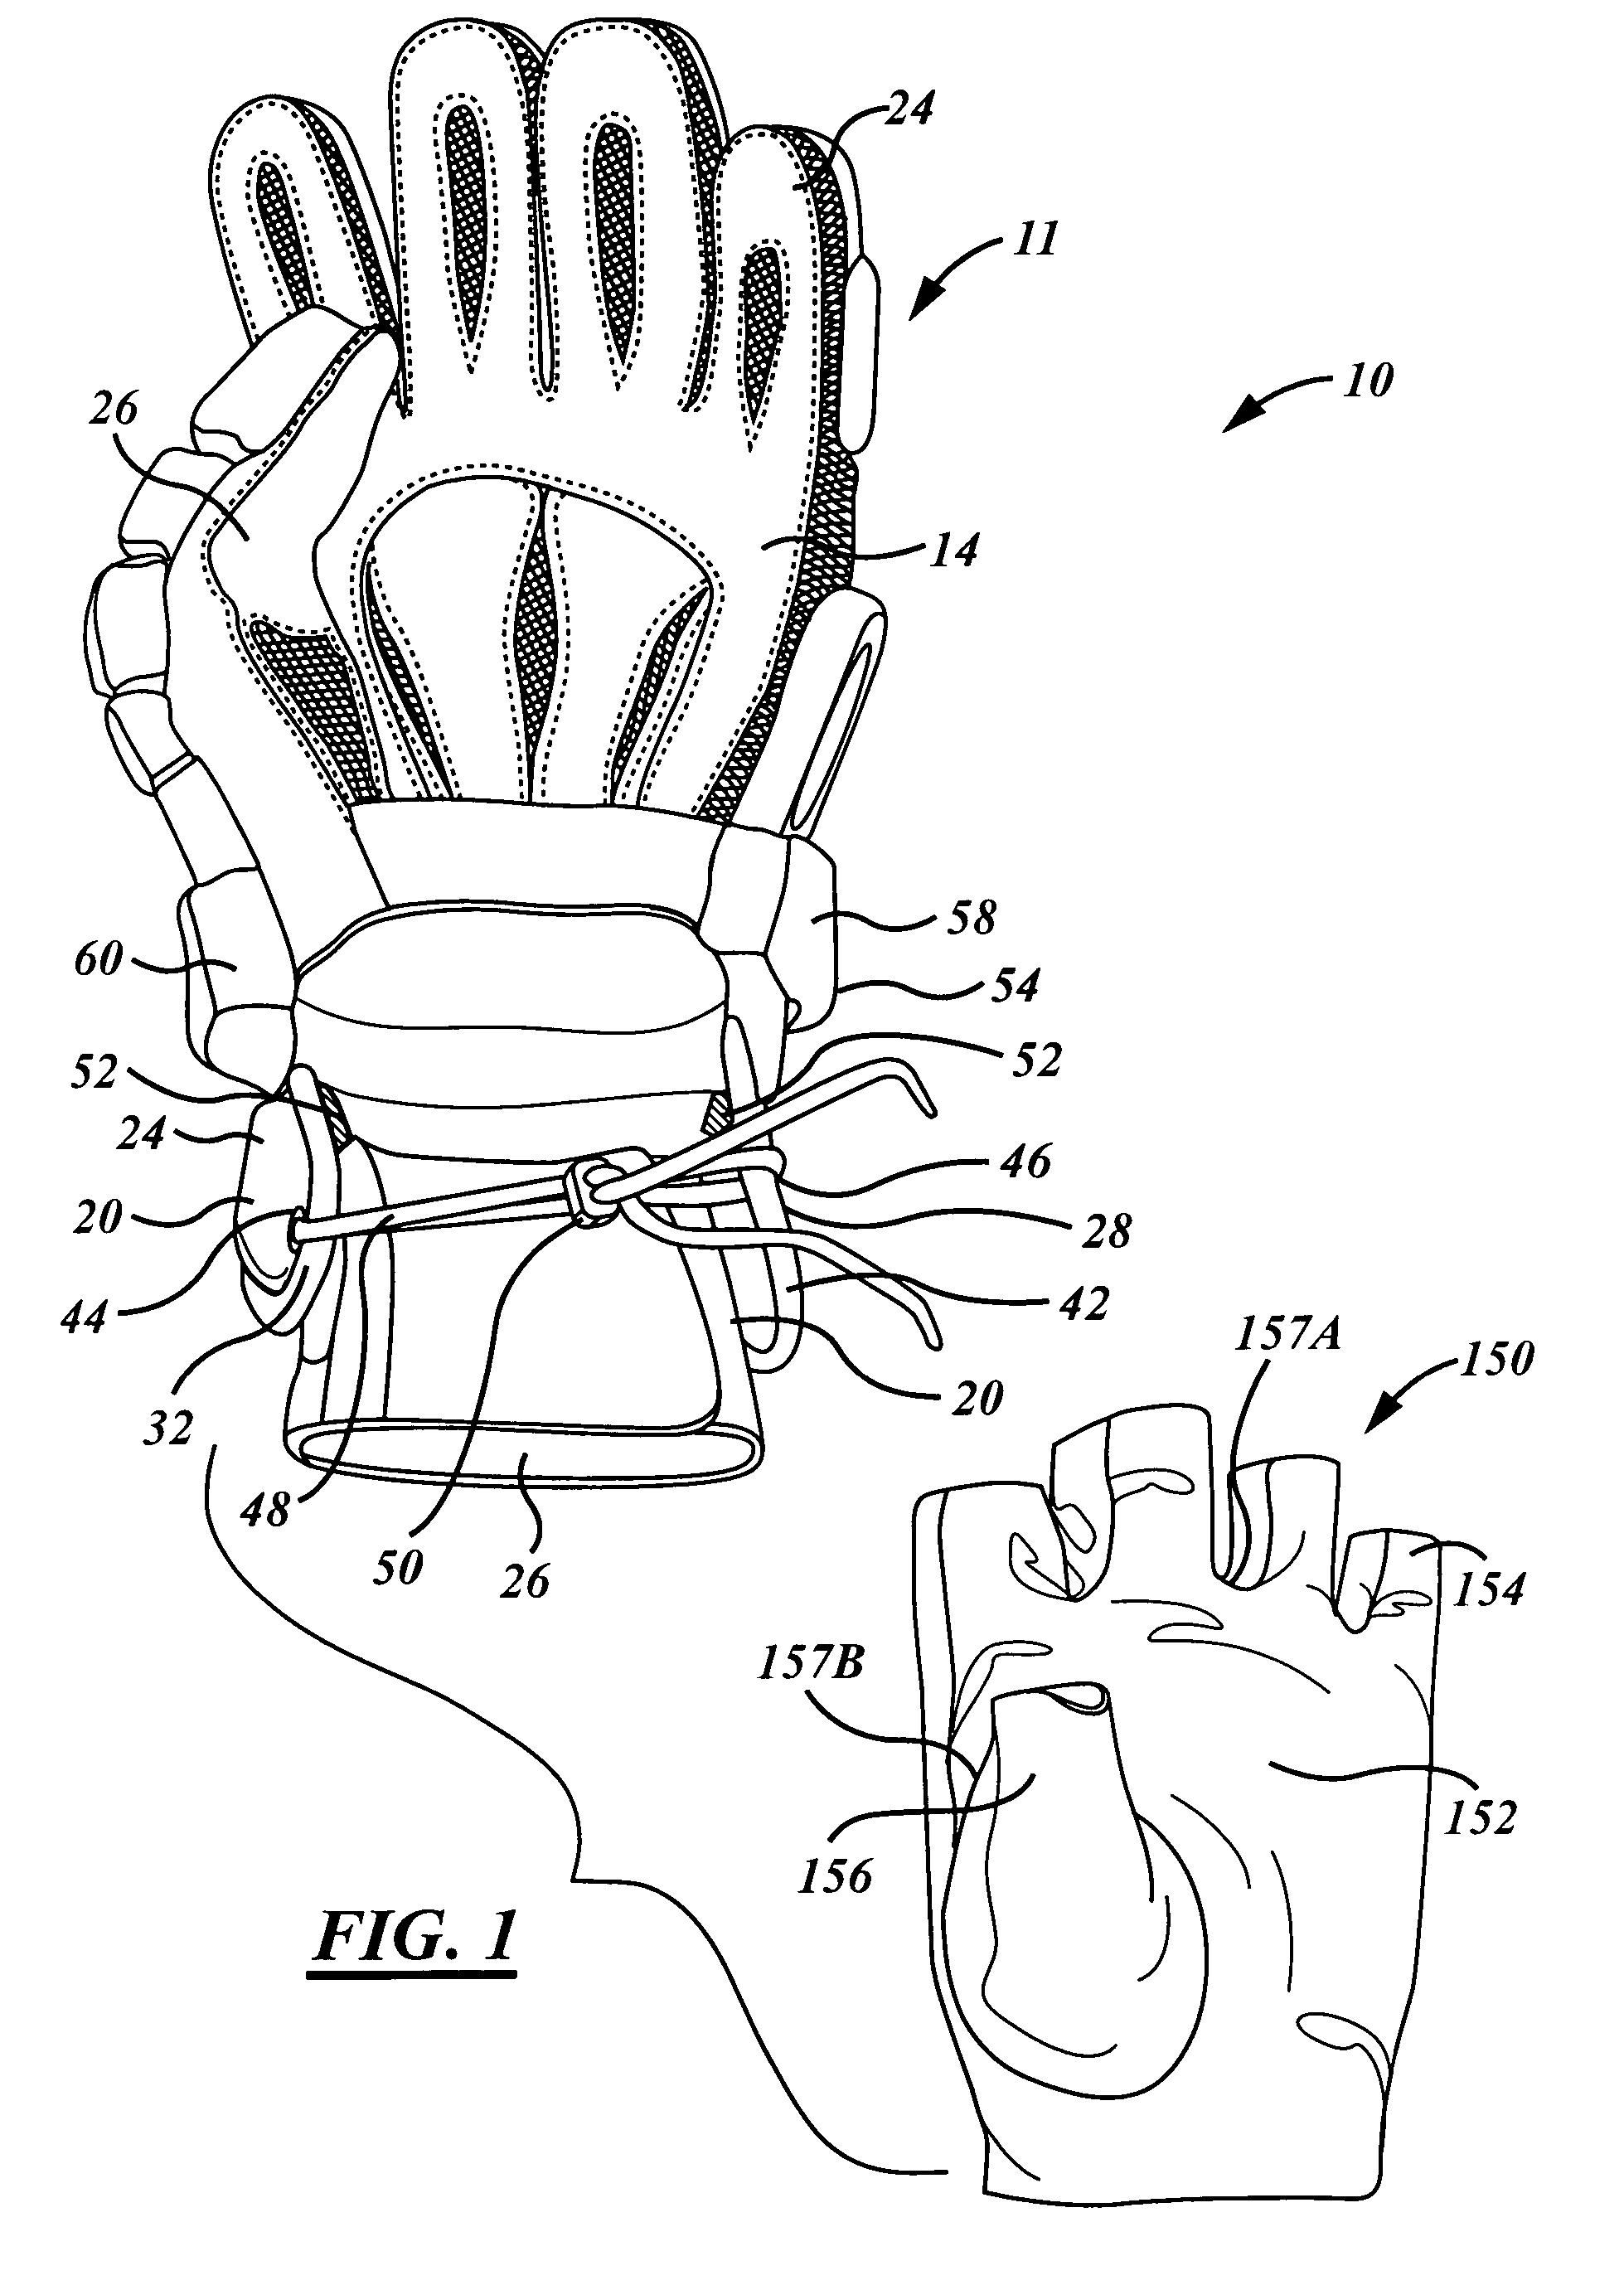 Protective glove having a padded palmless outer glove and form-fitting inner glove